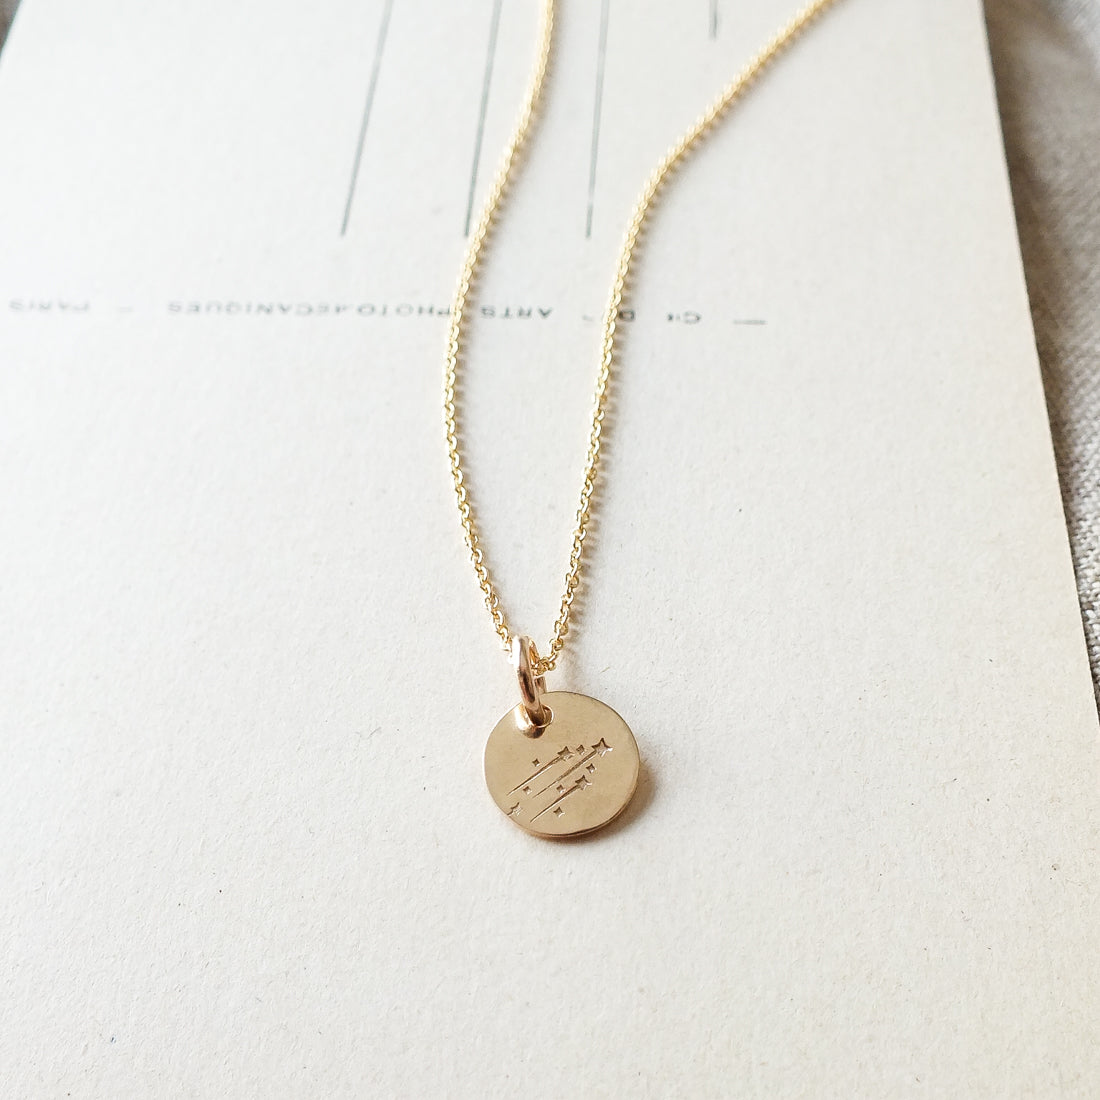 Becoming Jewelry&#39;s Believe in Magic Necklace with a shooting stars charm on a white background.